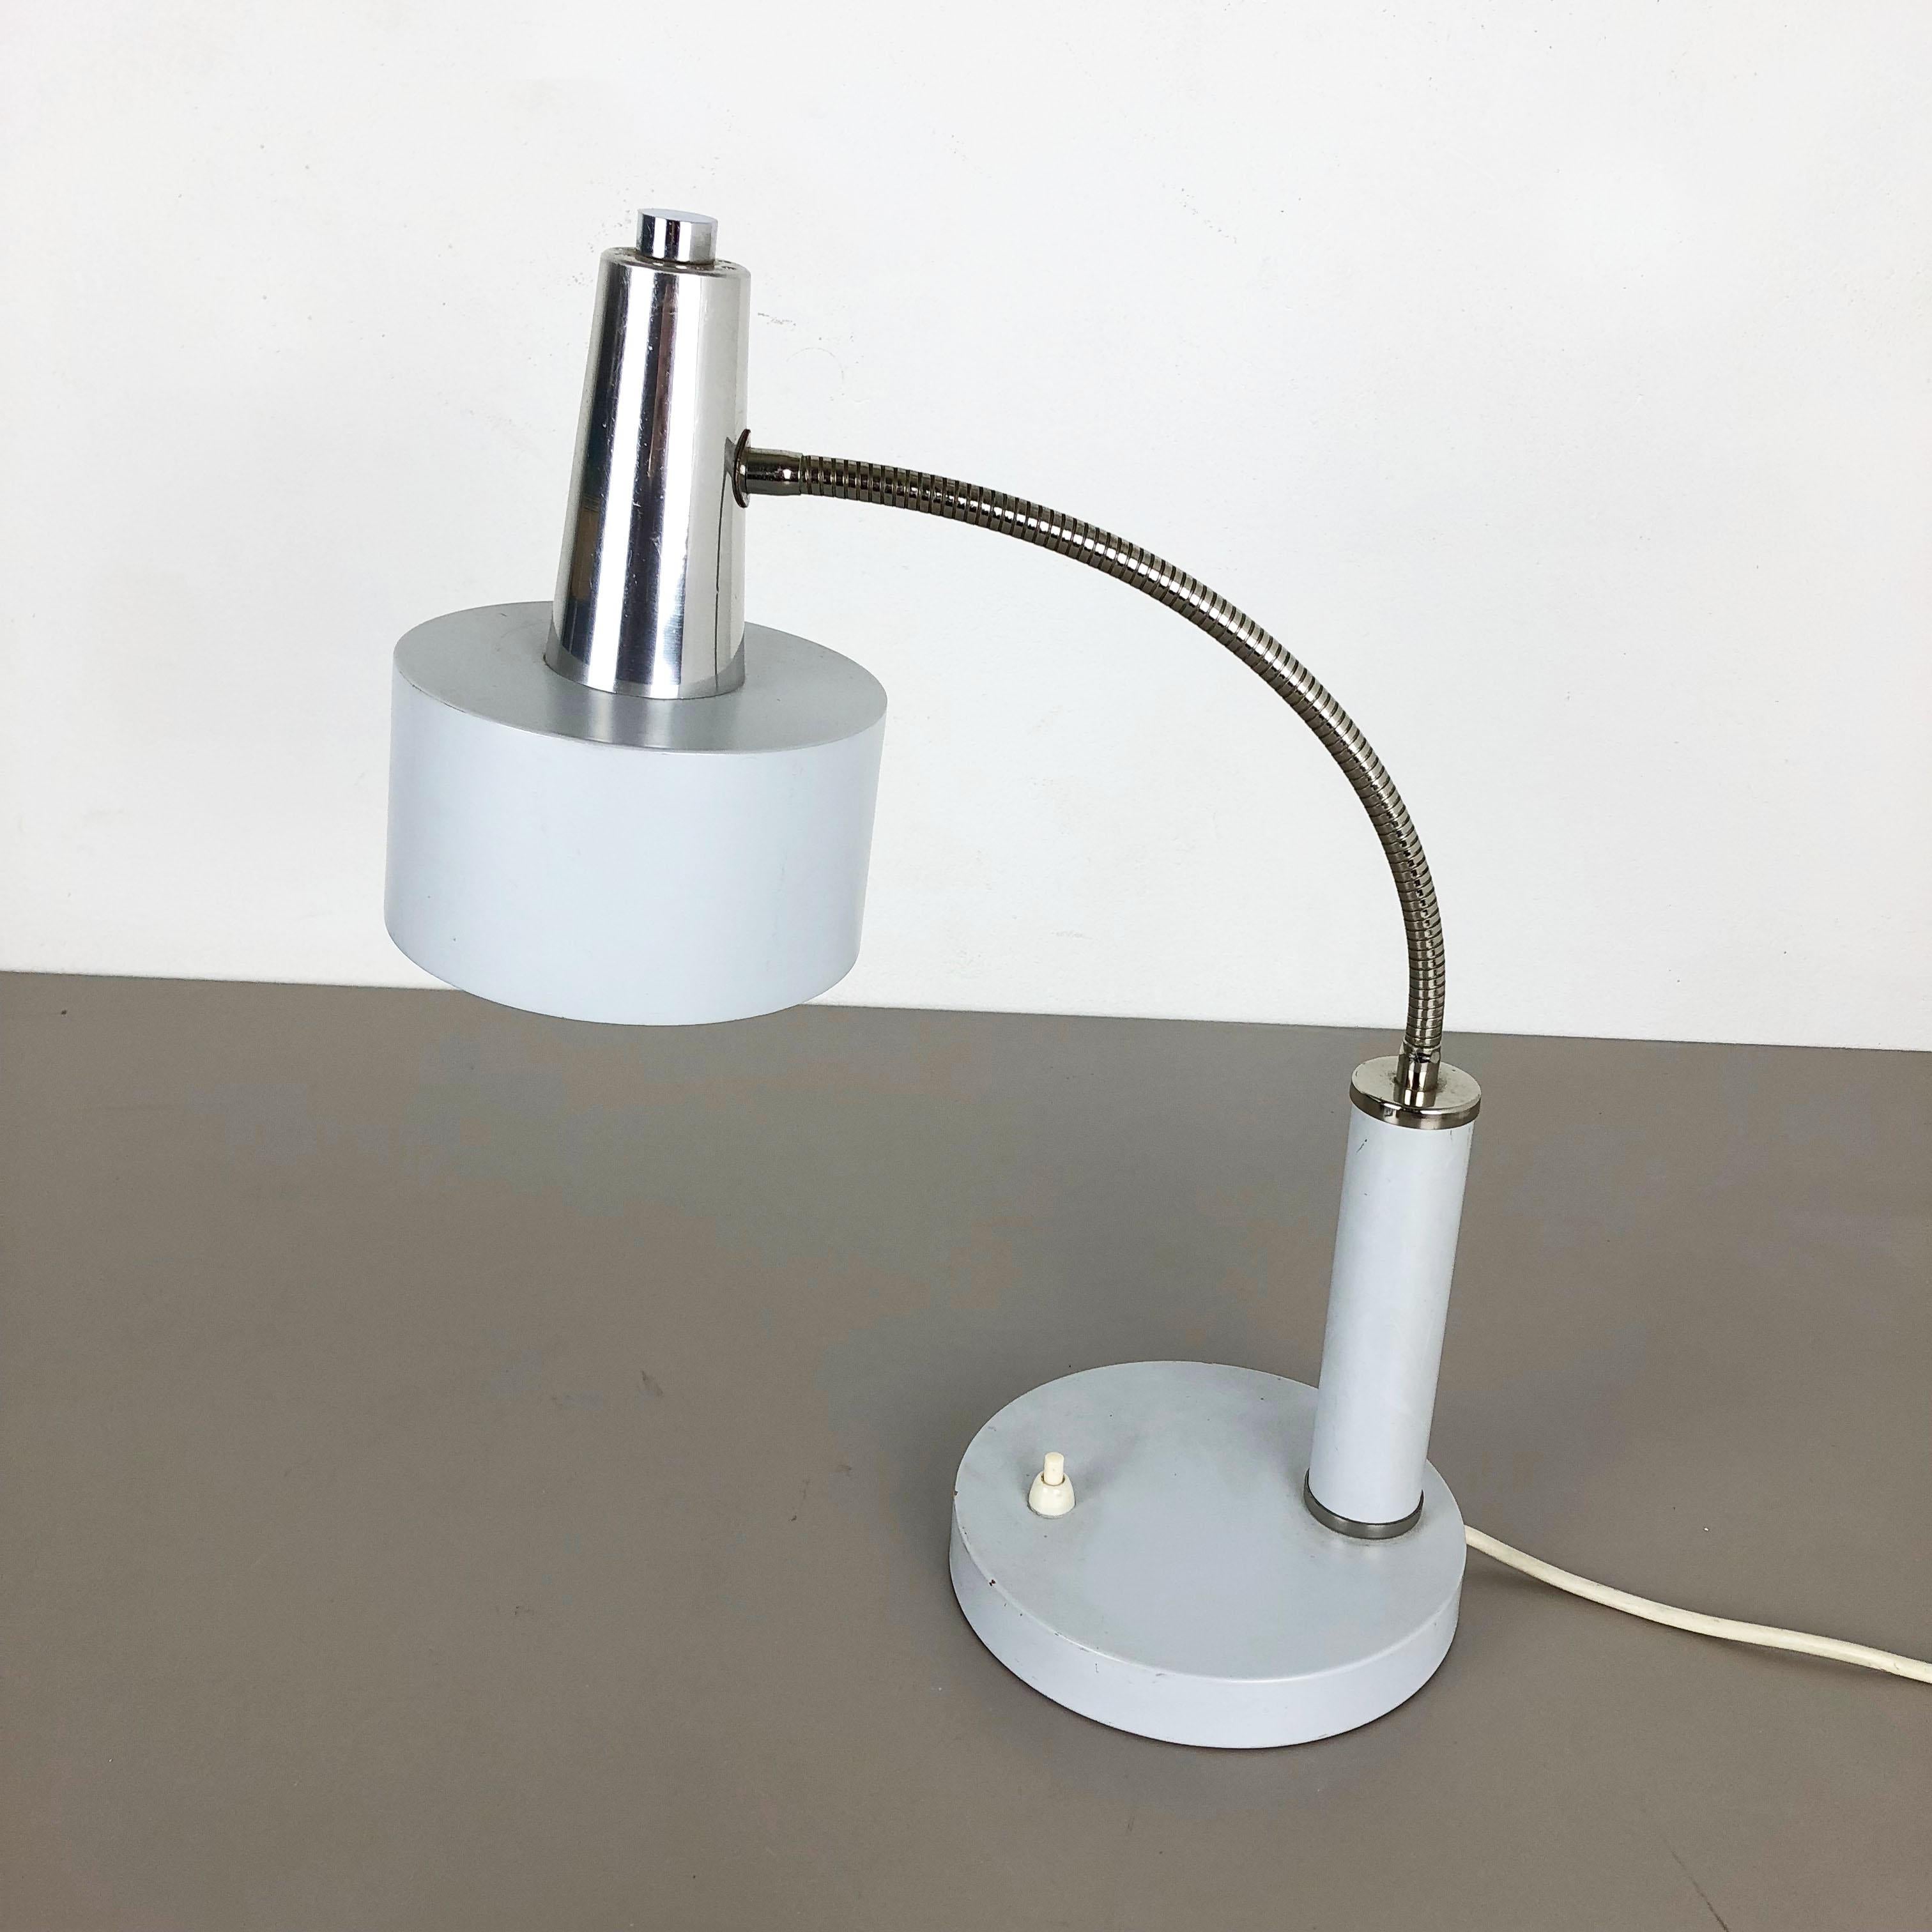 Article:

Table light


Origin:

Germany


Producer:

SIS lights, Germany attrib.


Material:

Metal


Age:

1960s



Description:

This original 1960s table light is attributed to be designed and produced by SIS Lights